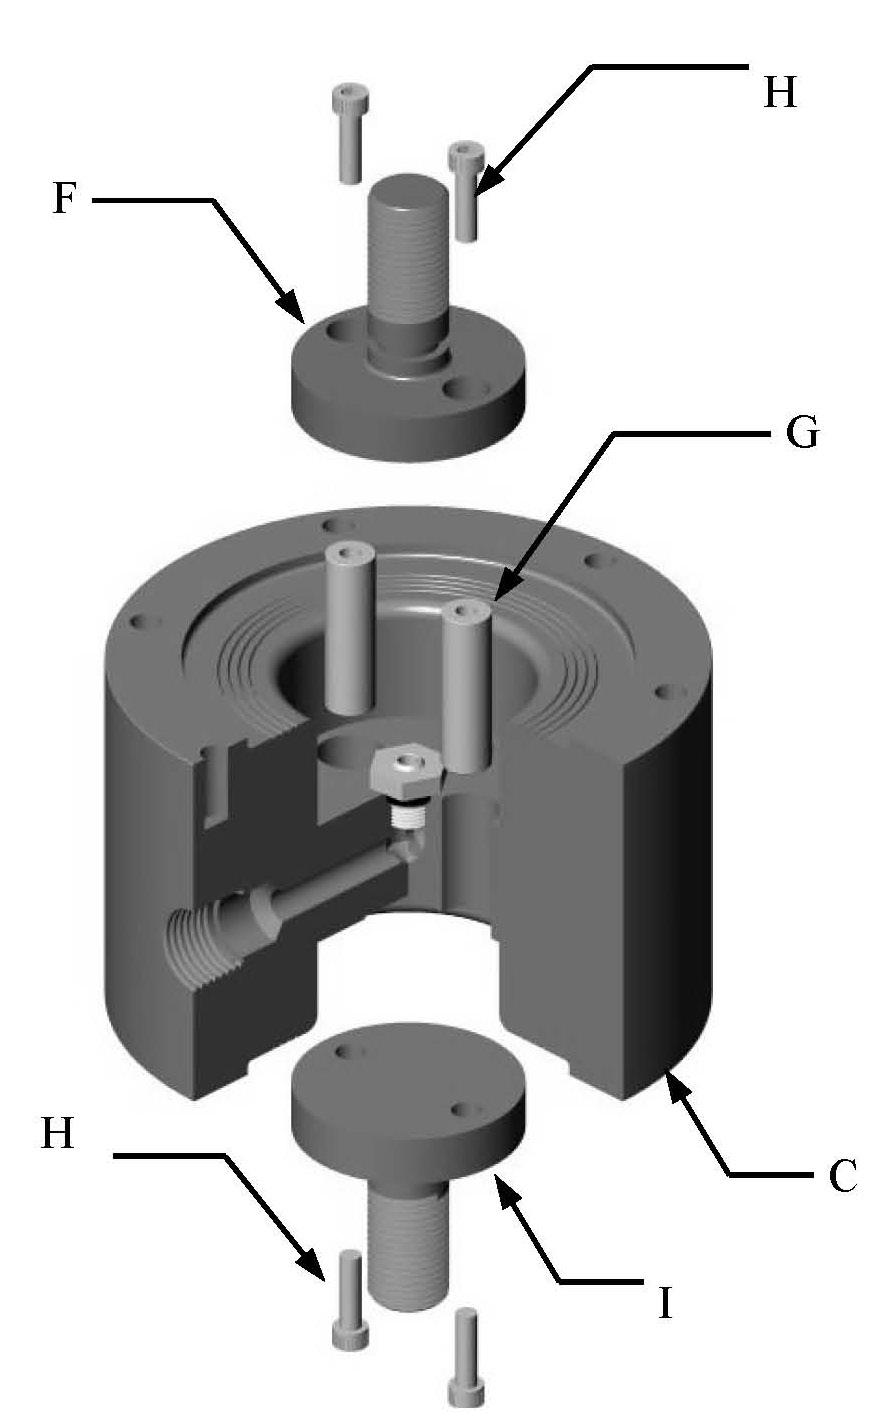 Connect the inside piston (I) to the posts (G) with two 8-3 x 1/ SHCS (H). Step. Press fit seat (E) into outside pistons (F). Make sure the seat is bottomed in the cavity.